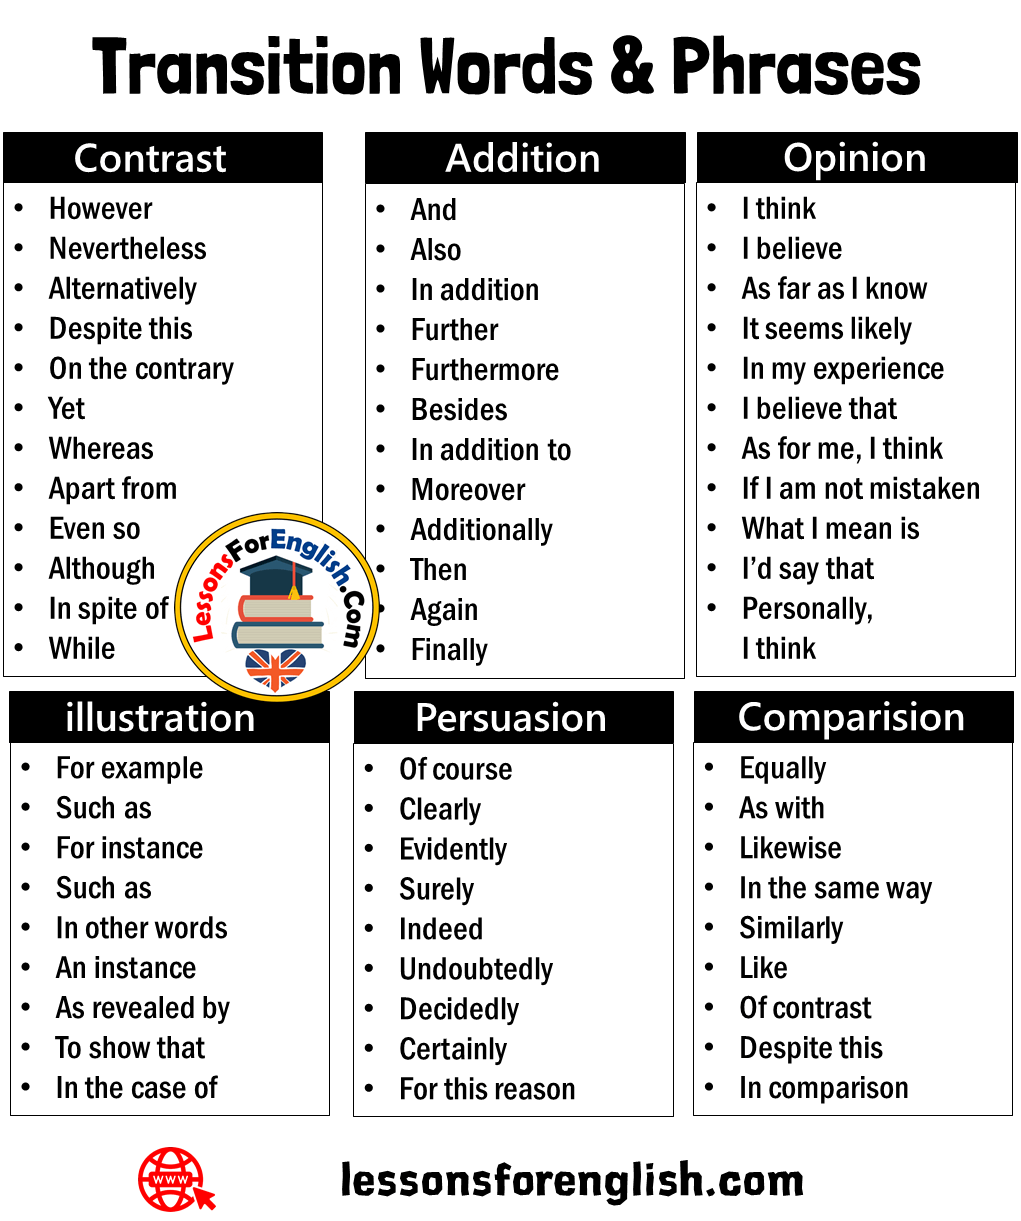 100 transition words